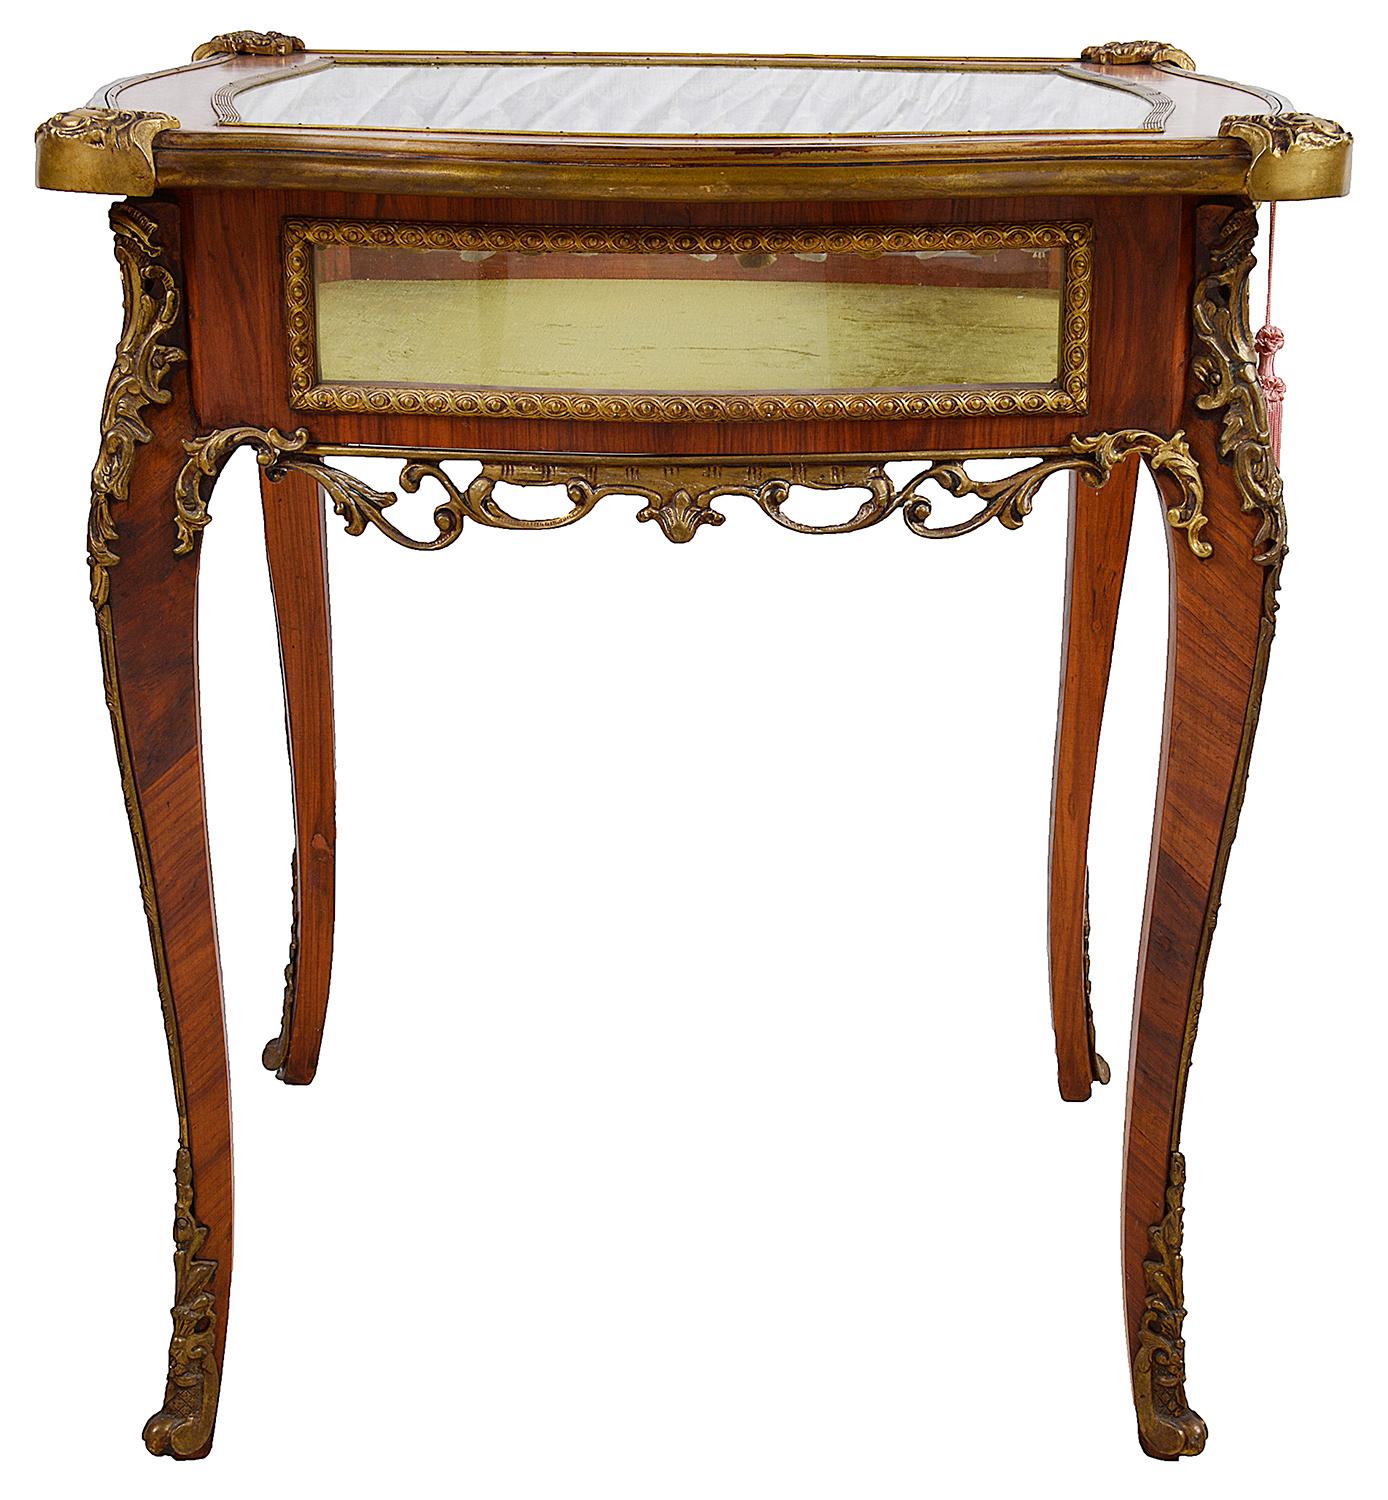 A good quality French mahogany, ormolu-mounted bijouterie table, having glazed sides and top, a hinged top, opening to reveal a silk lined display compartment, raised on elegant cabriole legs.